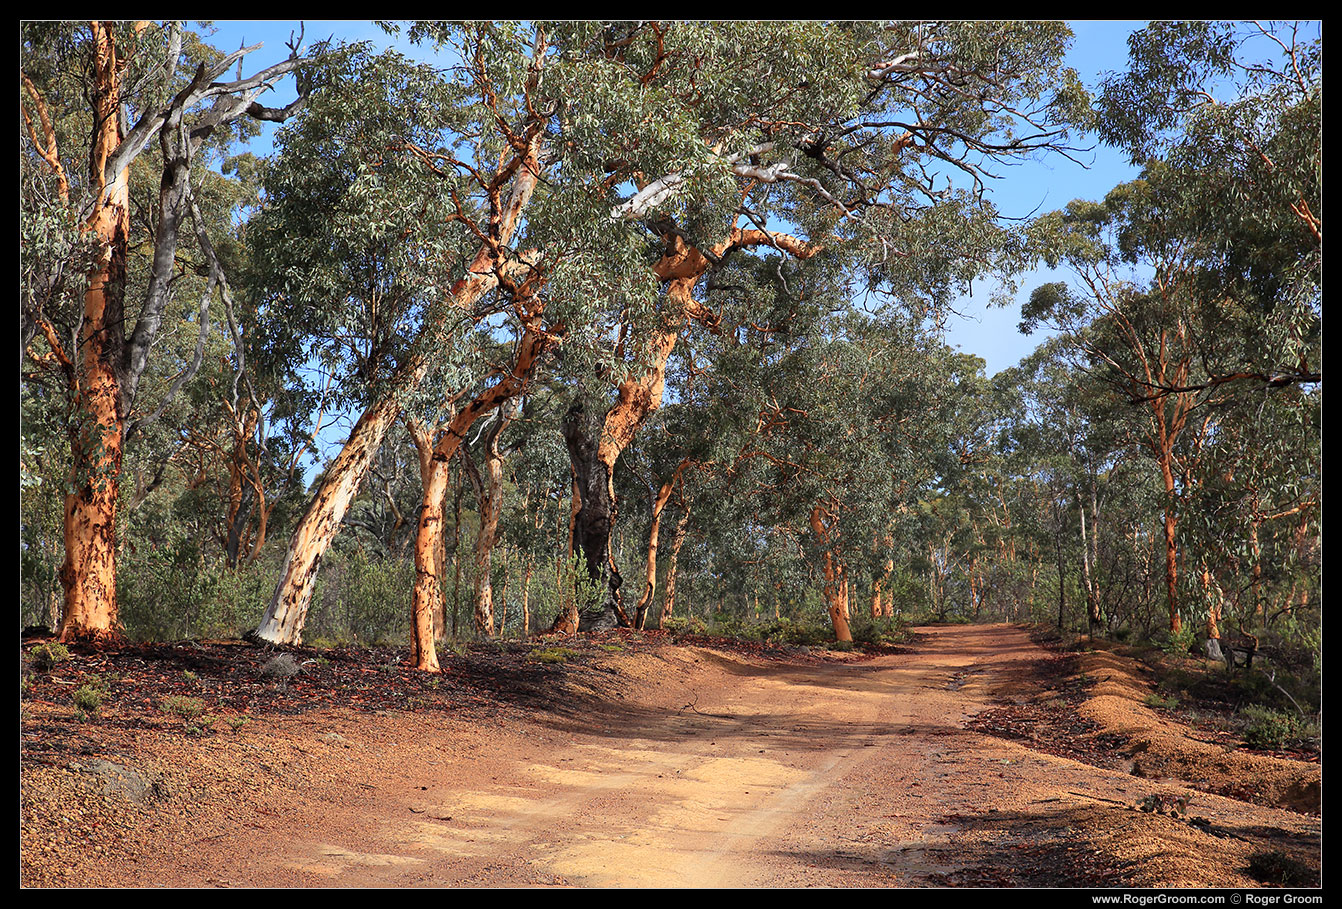 The road winding in to Mt Observation, between Perth and York in the Western Australian Wheatbelt region.